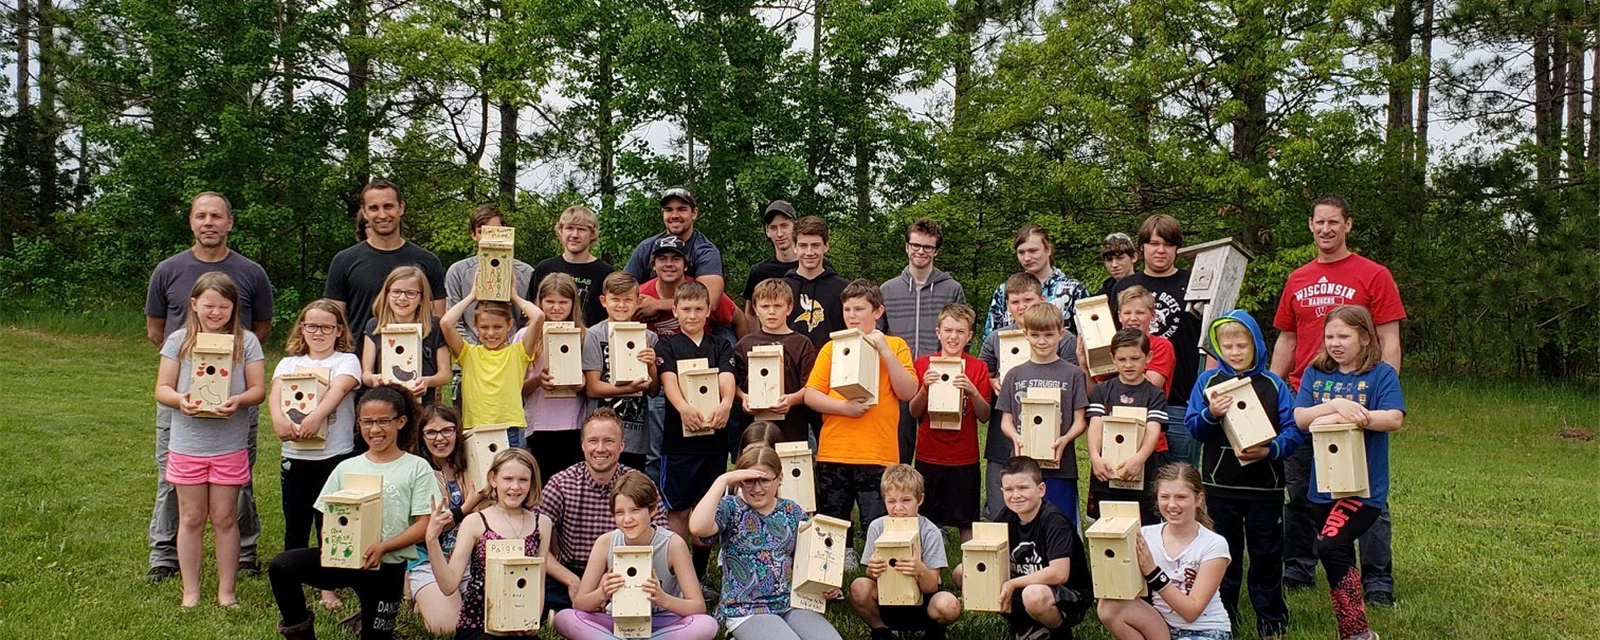 Group Picture Building Bird Houses